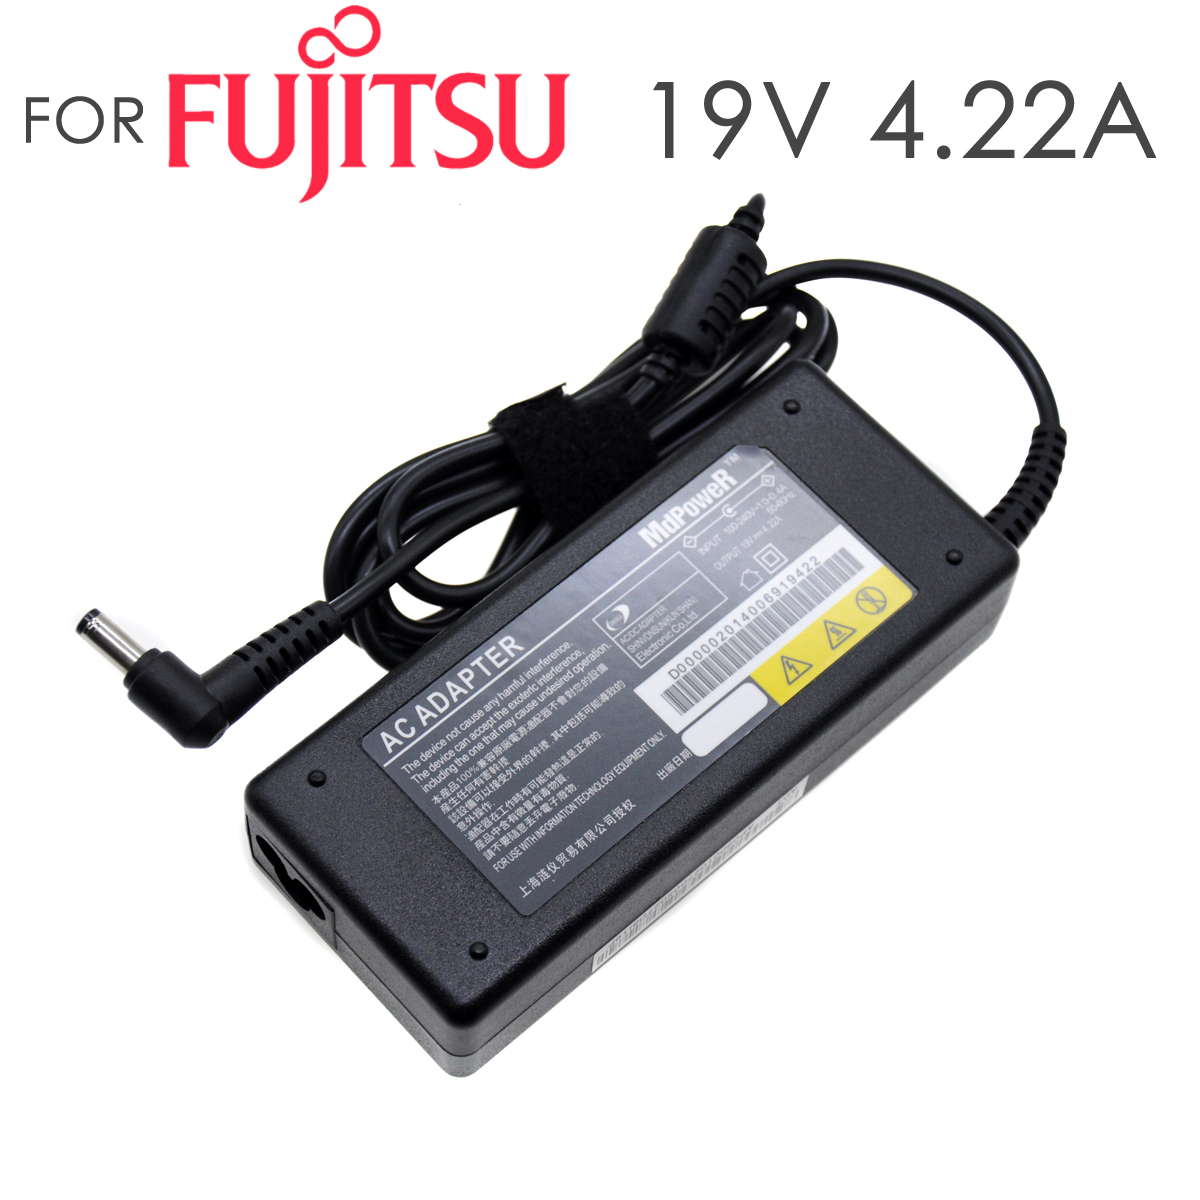 MDPOWER For Fujitsu FMV Lifebook LH530R LH530V LH531 LH532 laptop power supply power AC adapter charger cord 19V 4.22A 80W